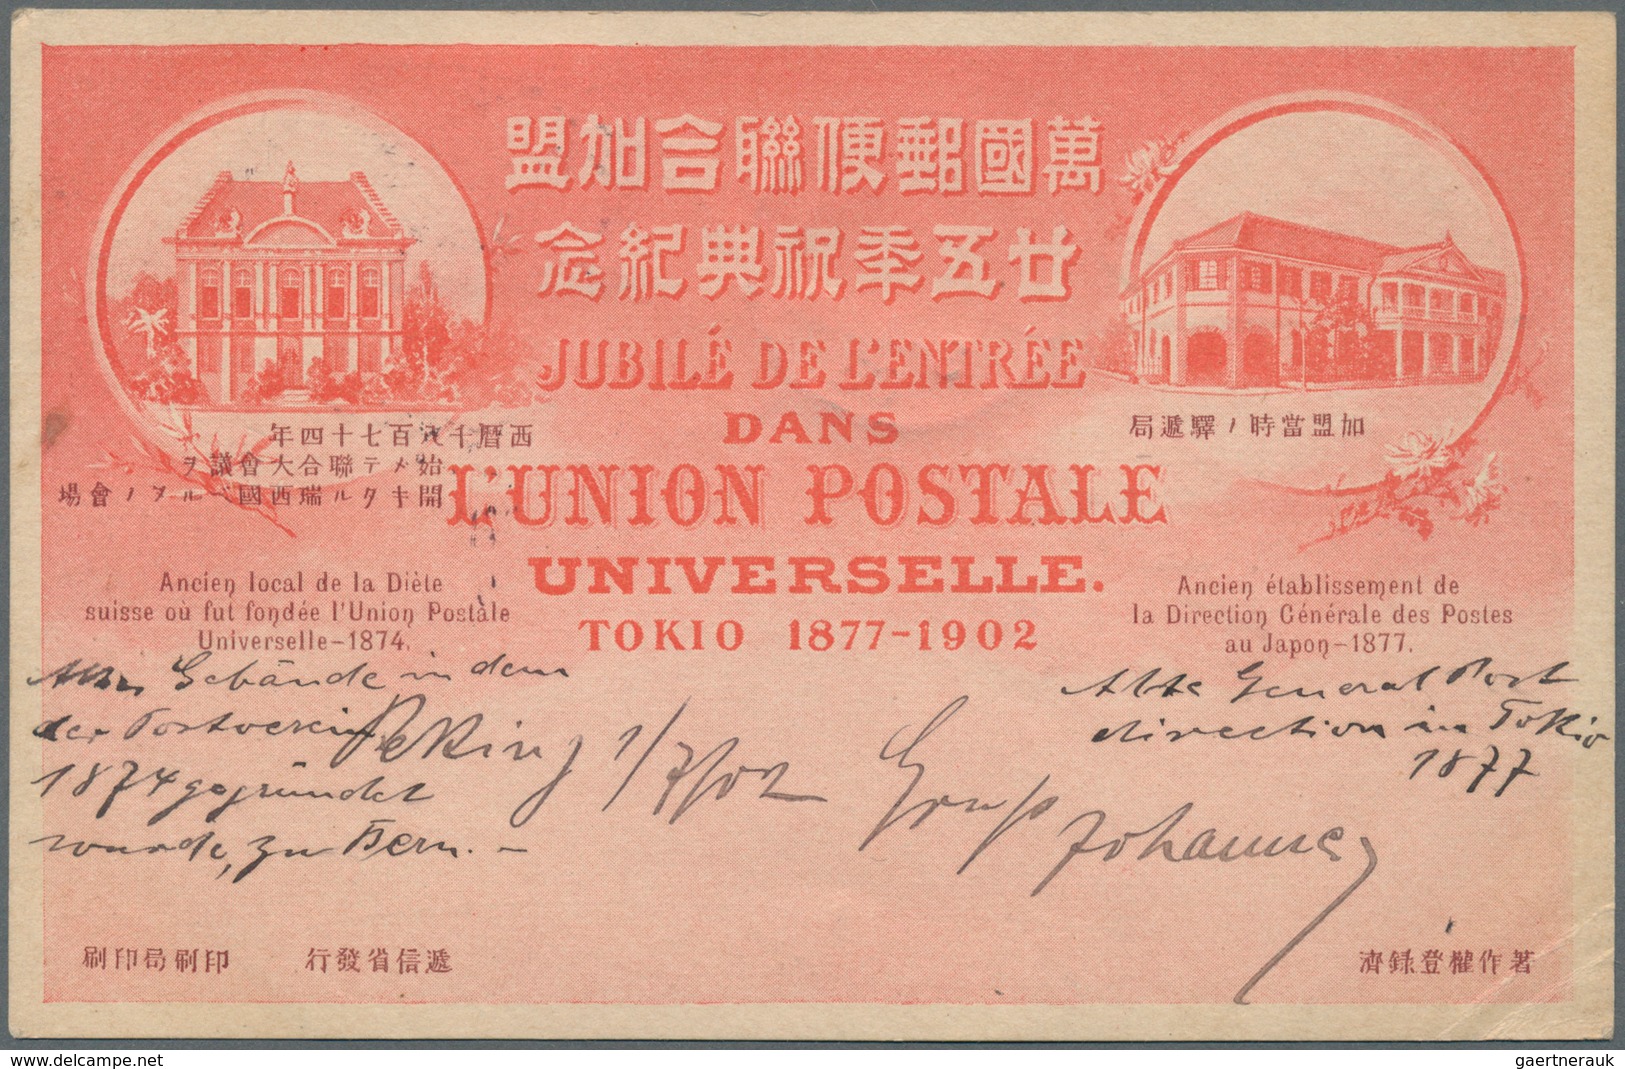 Japanische Post in China: 1902, UPU-jubilee official ppc, complete set of 6 all different, franked w